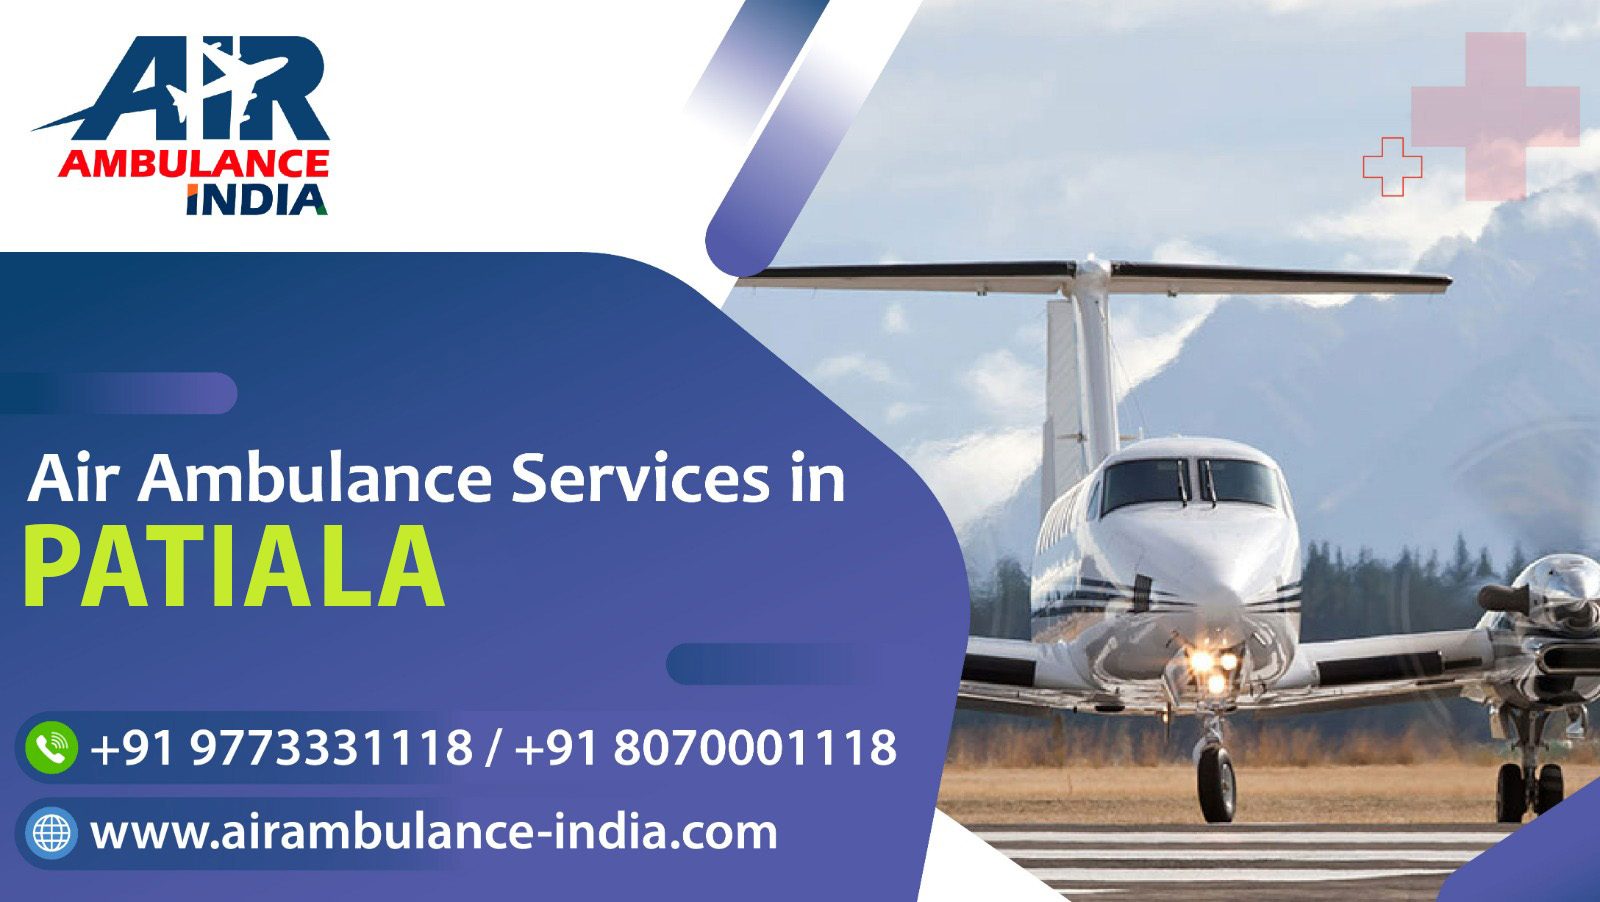 Air Ambulance Services in Patiala